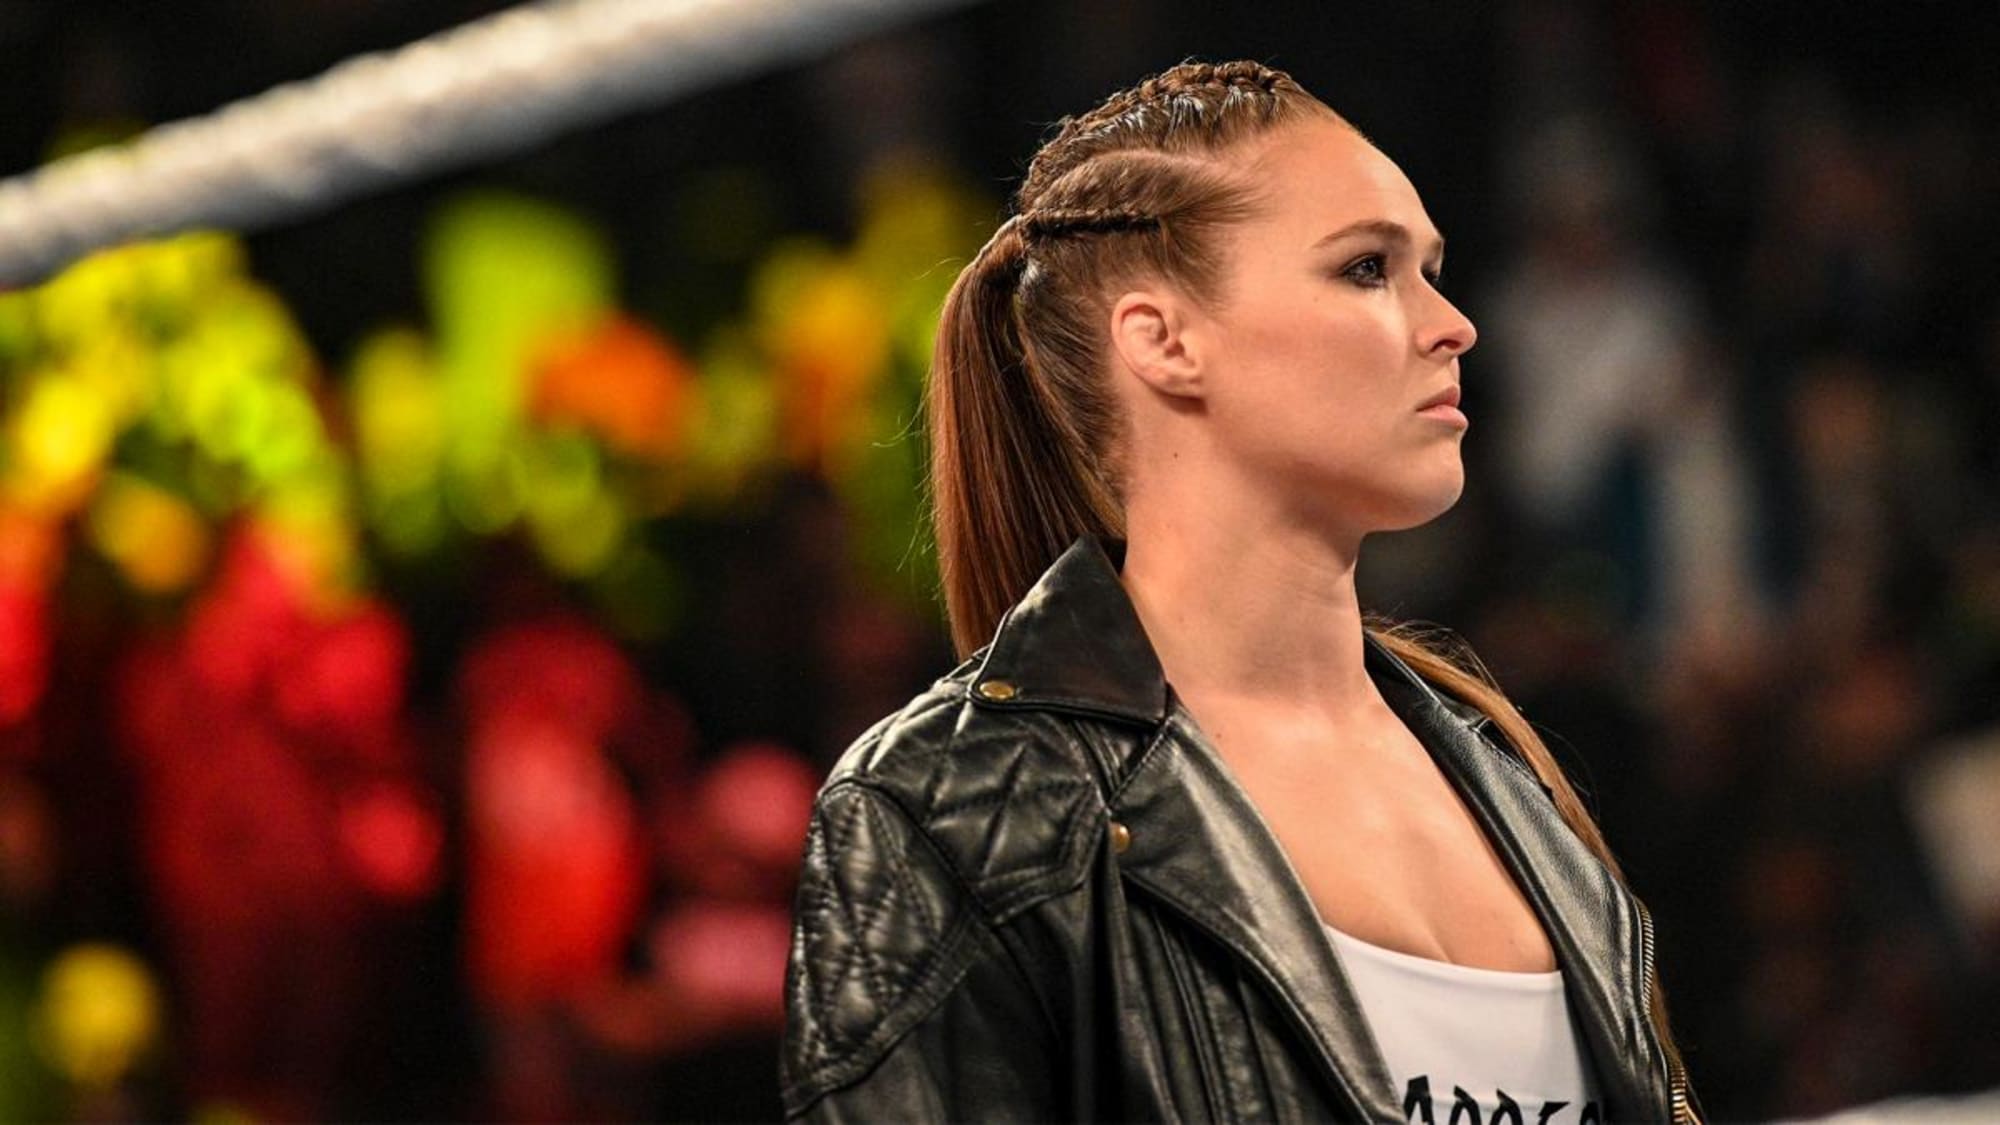 WWE has a Ronda Rousey problem that it must solve